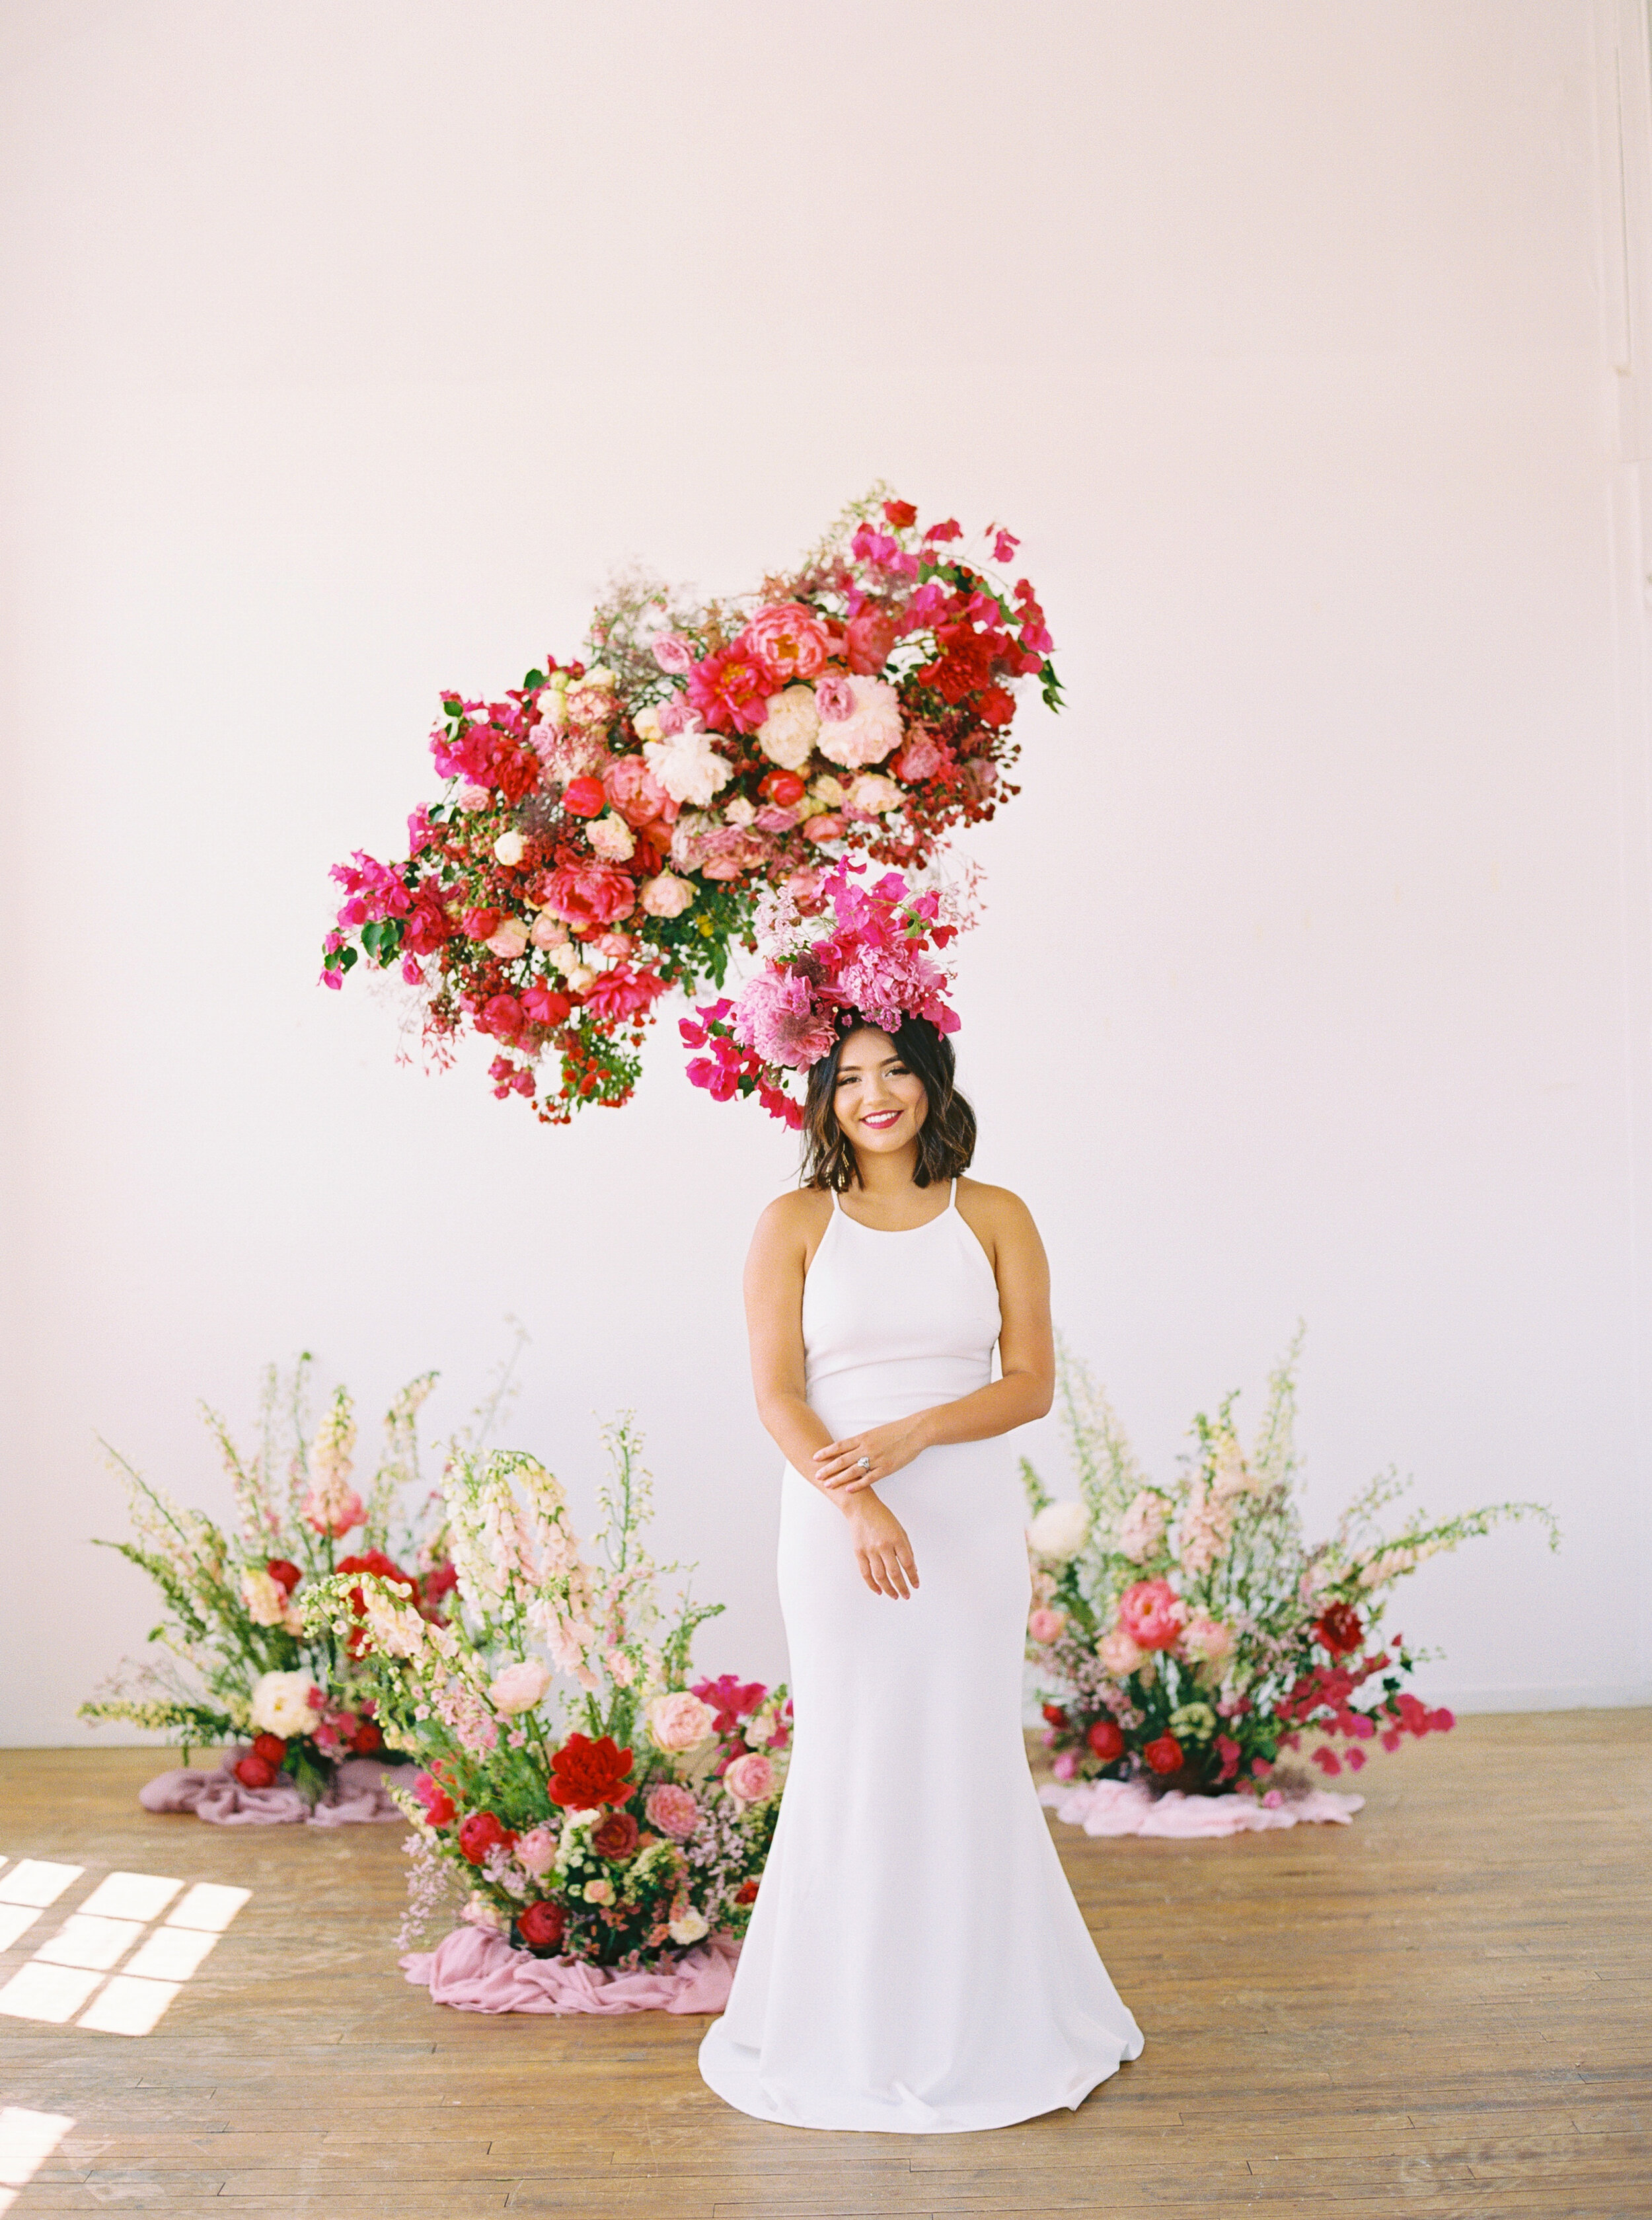 A Romantic Wedding Elopement Filled with Colorful Fuchsia - Sarahi Hadden Submission-121.jpg